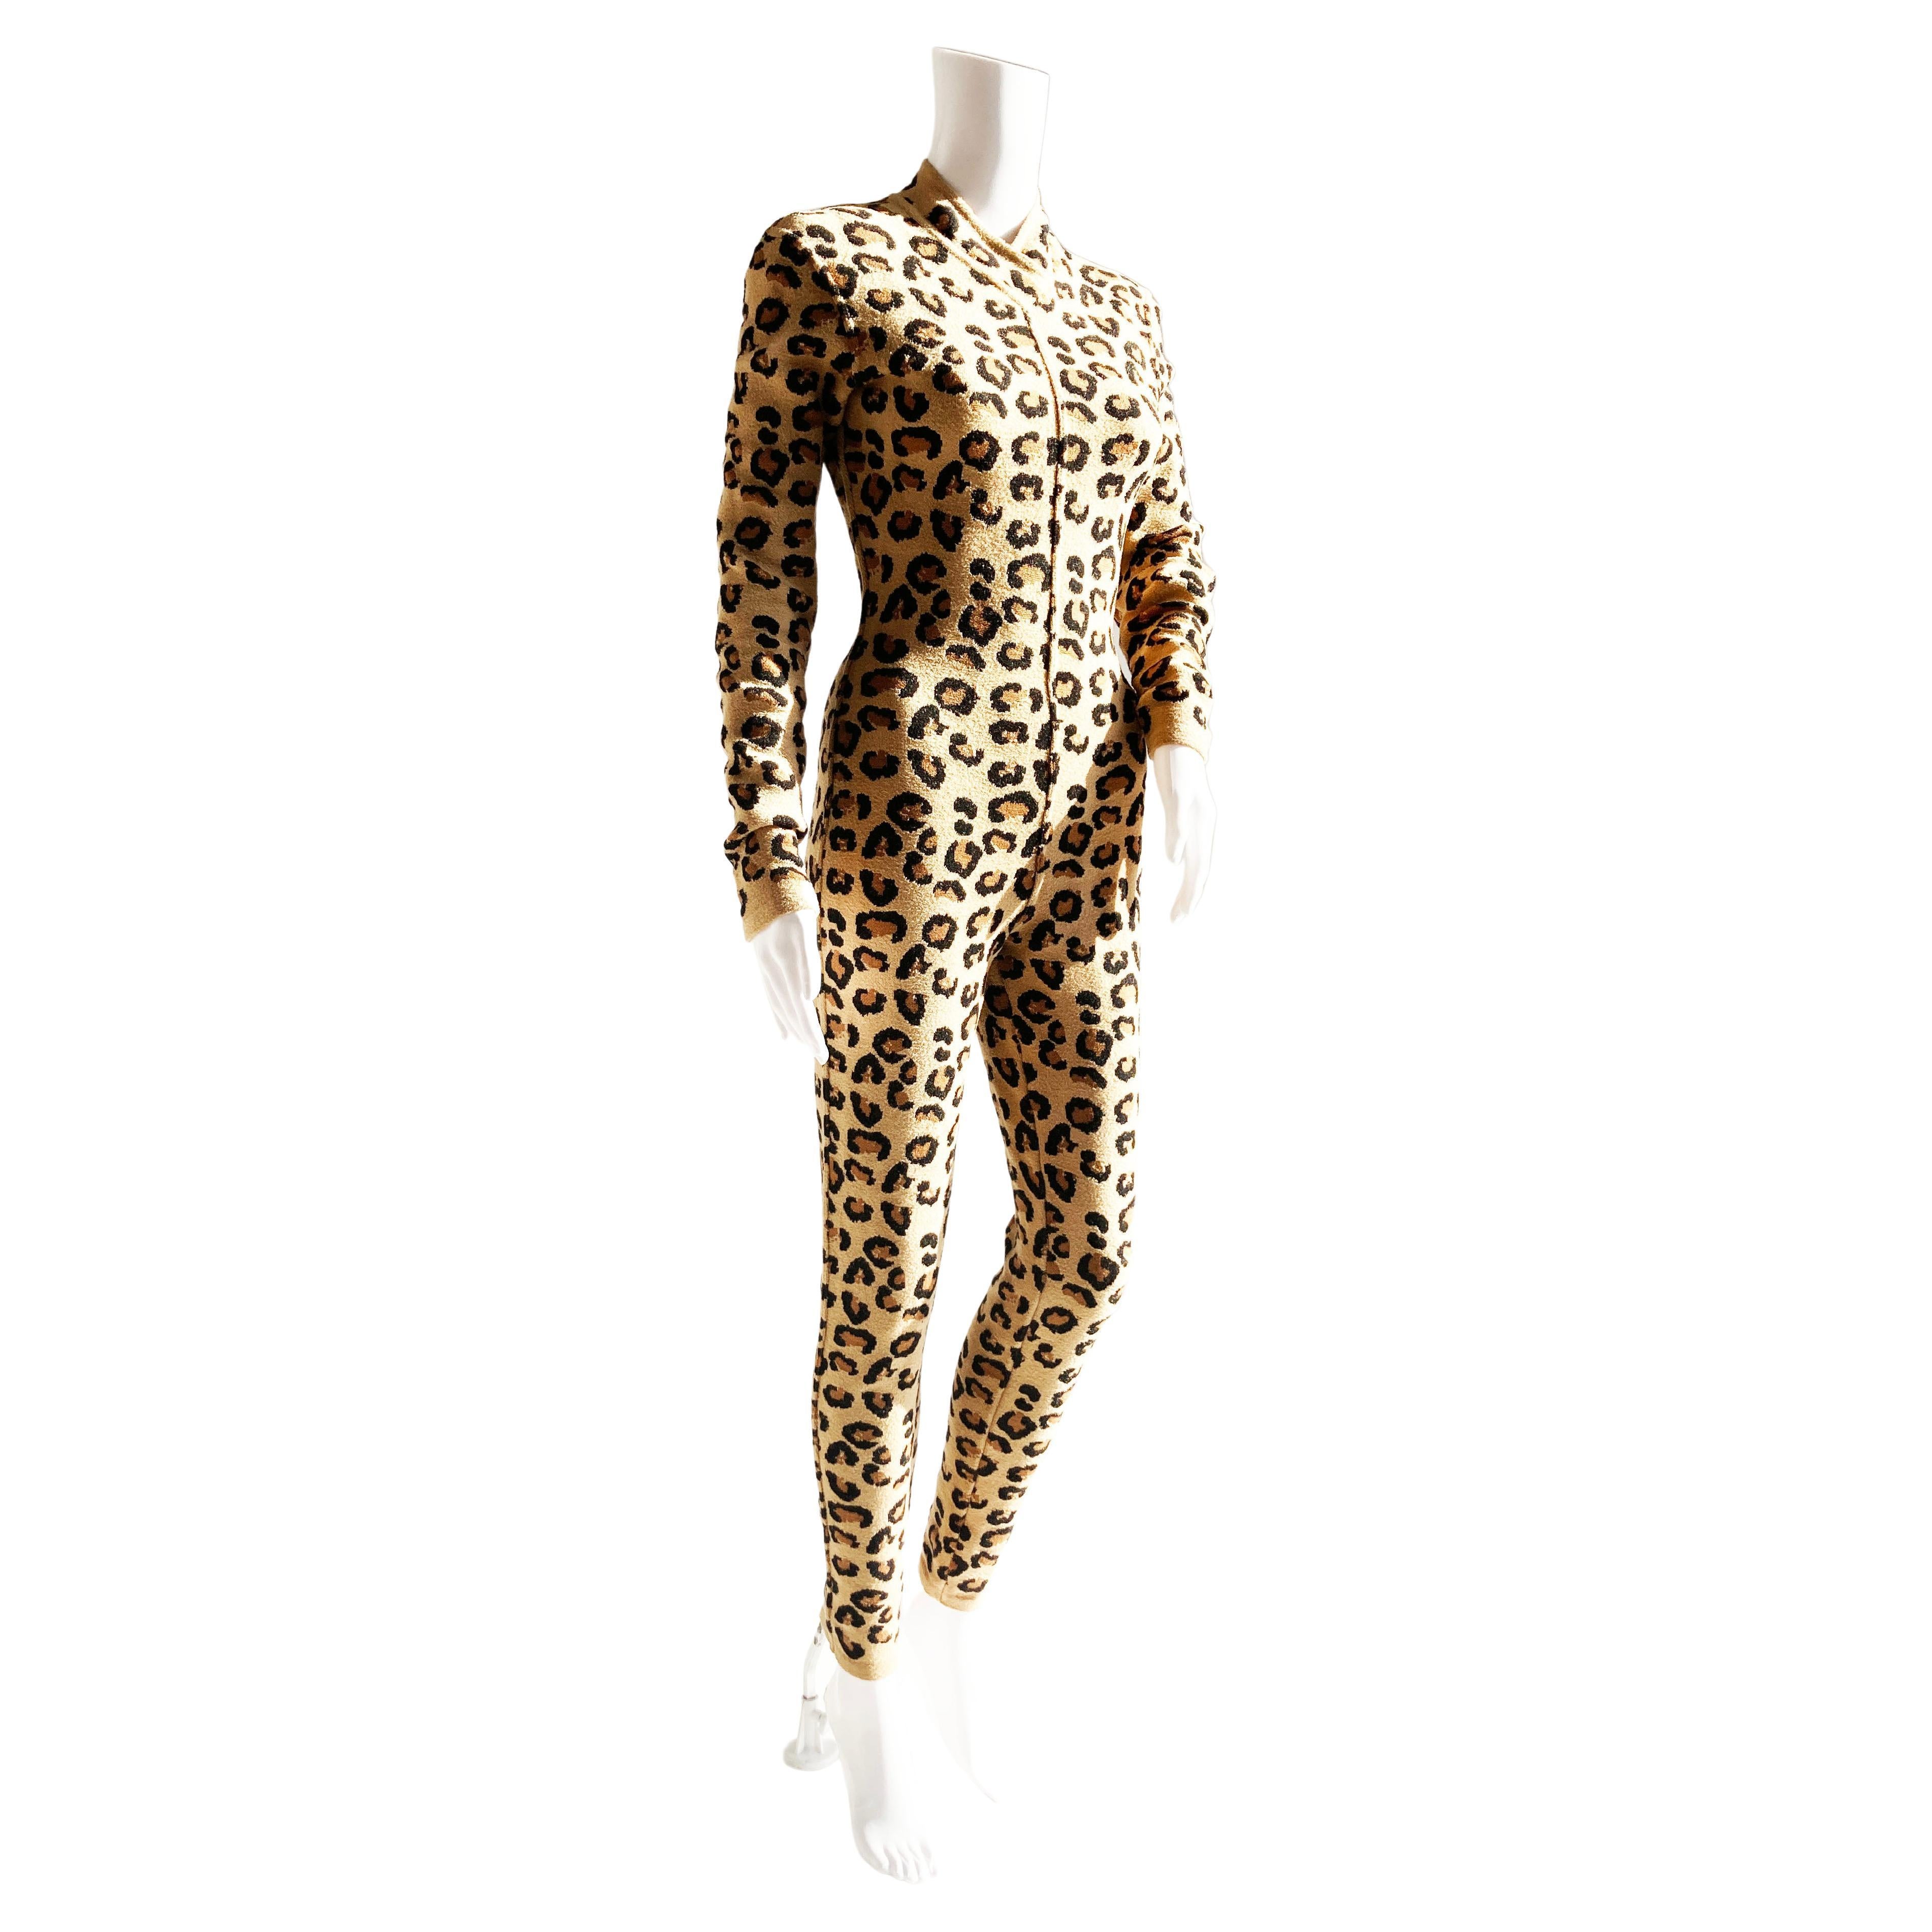 The rarest of the rare: runway look no. 72 from Alaïa's FW1991 collection, an iconic leopard jacquard knit jumpsuit, made in Italy. Cut in a dense, super-compact jacquard, with a layered V-neck opening, curve-hugging cut, and invisible zip up center